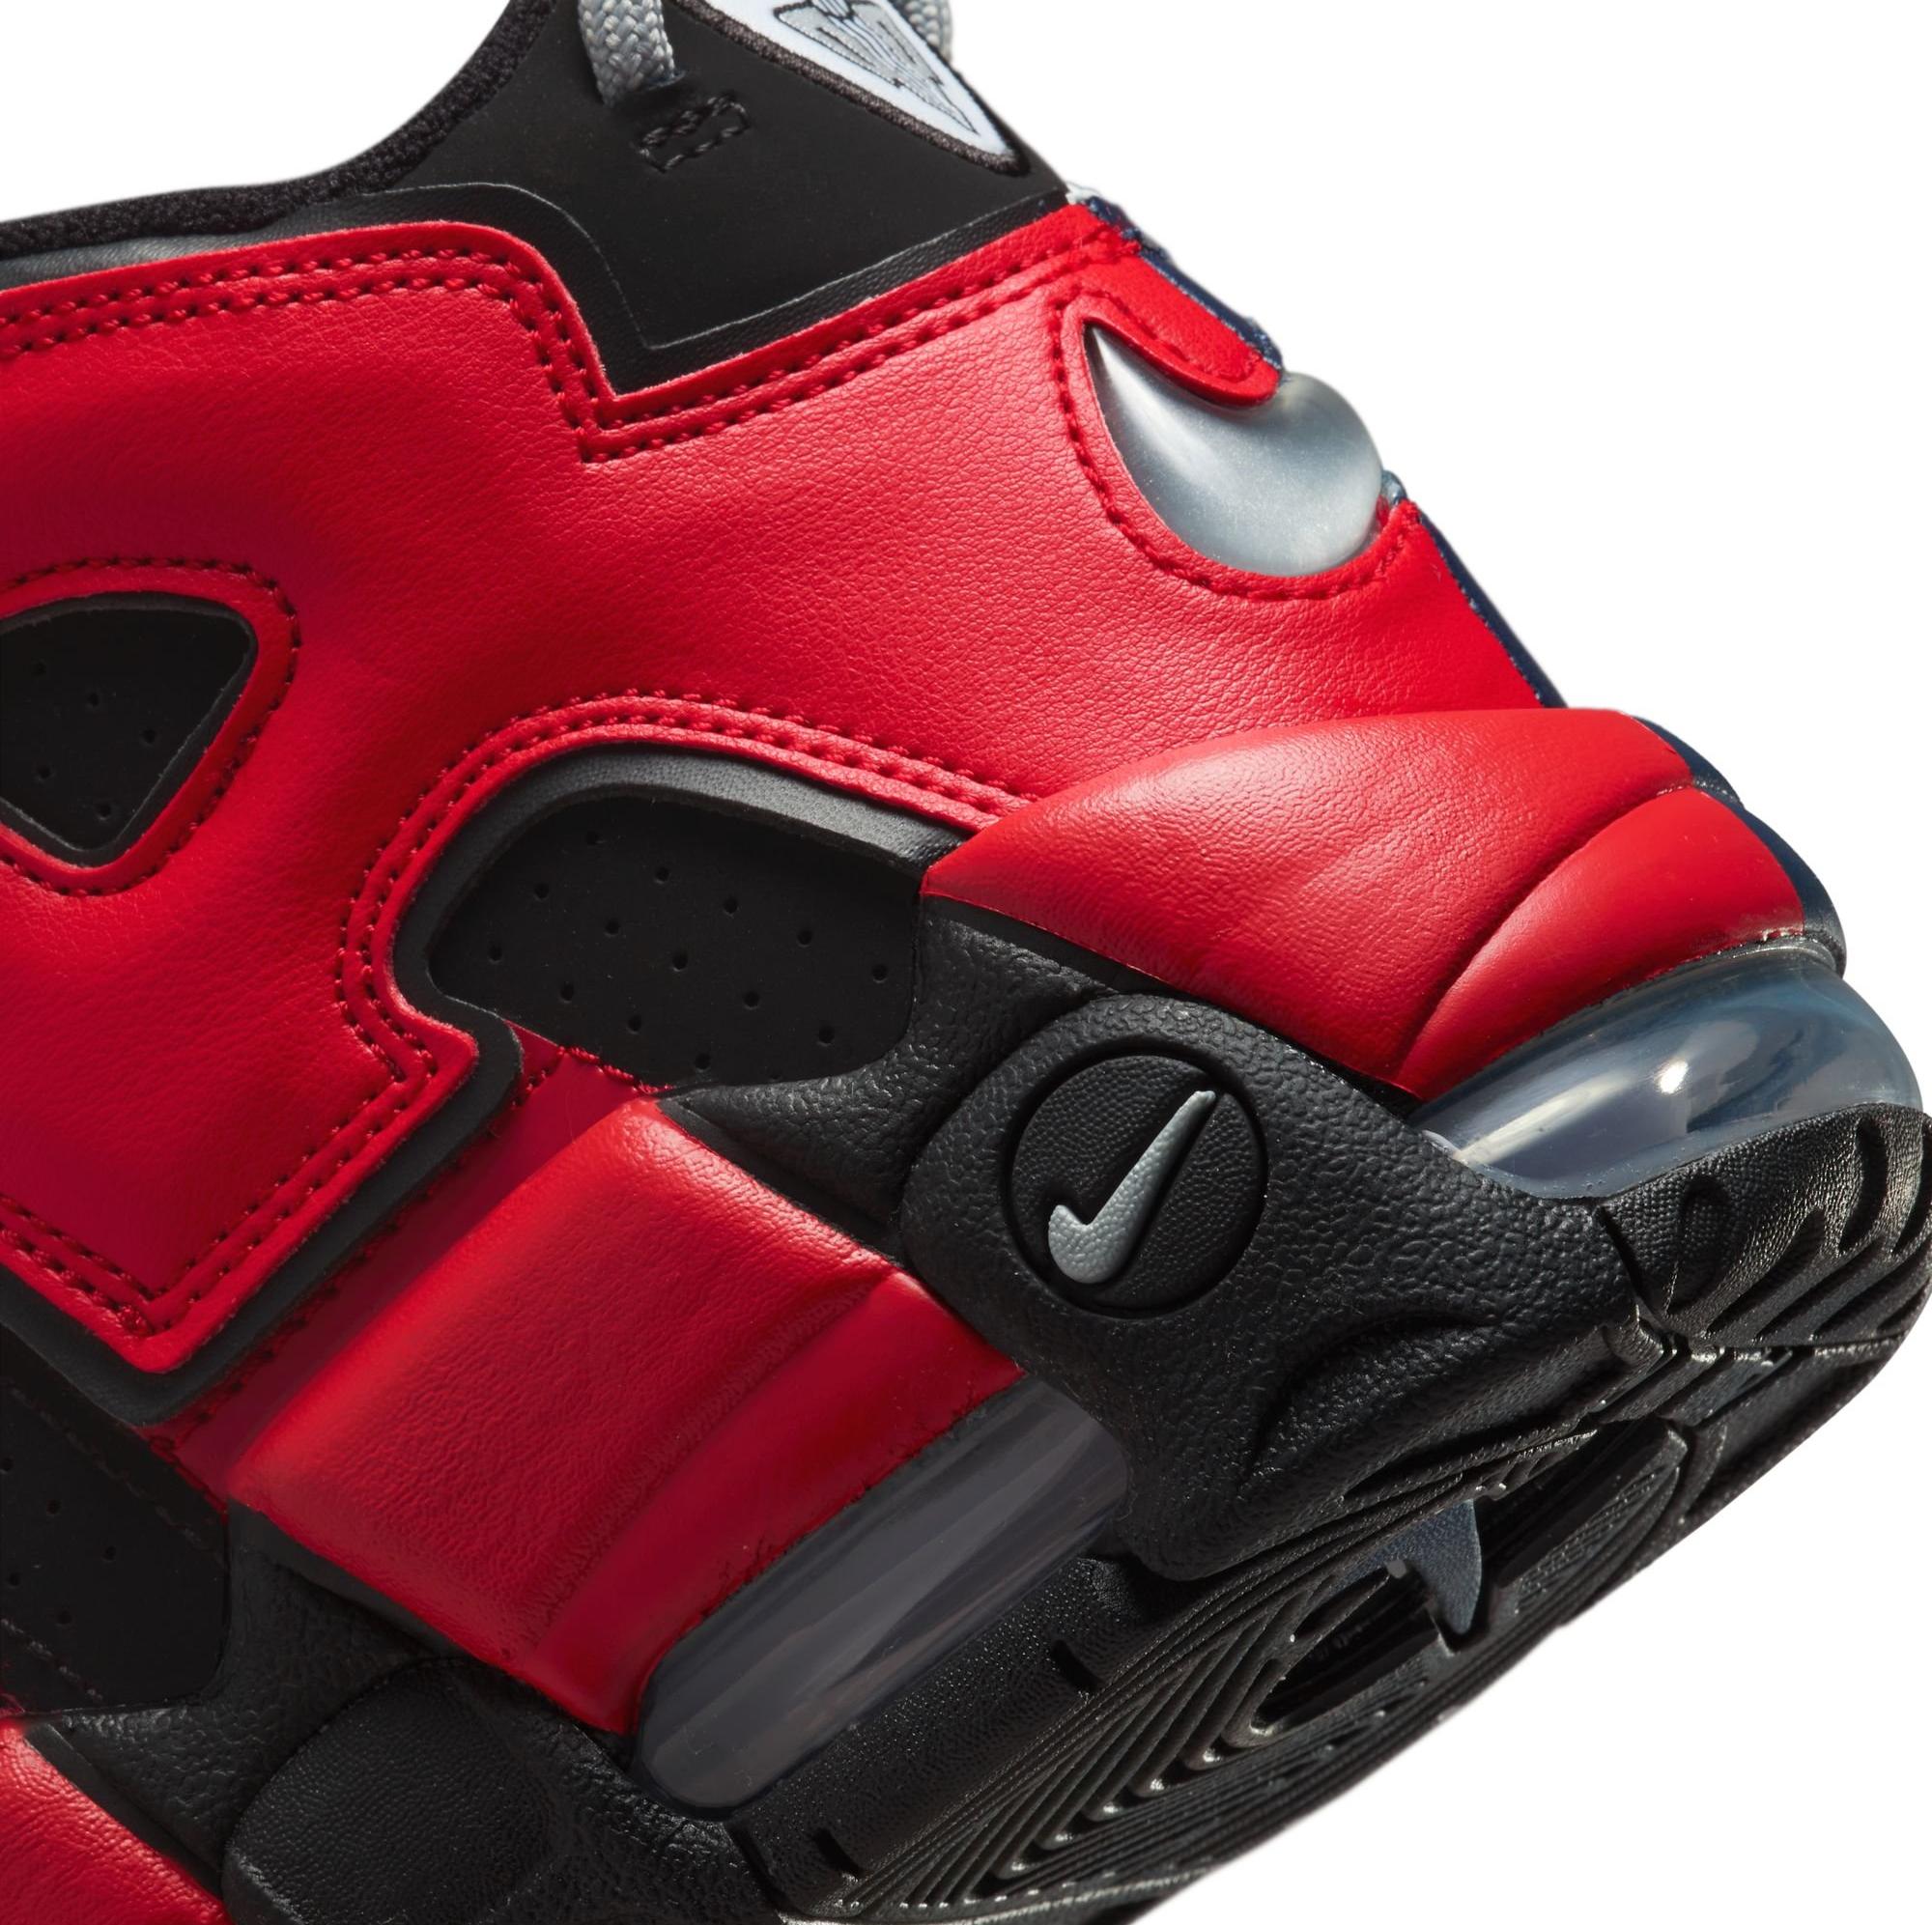 Sneakers Release – Nike Air More Uptempo '96 “Spring Forward 